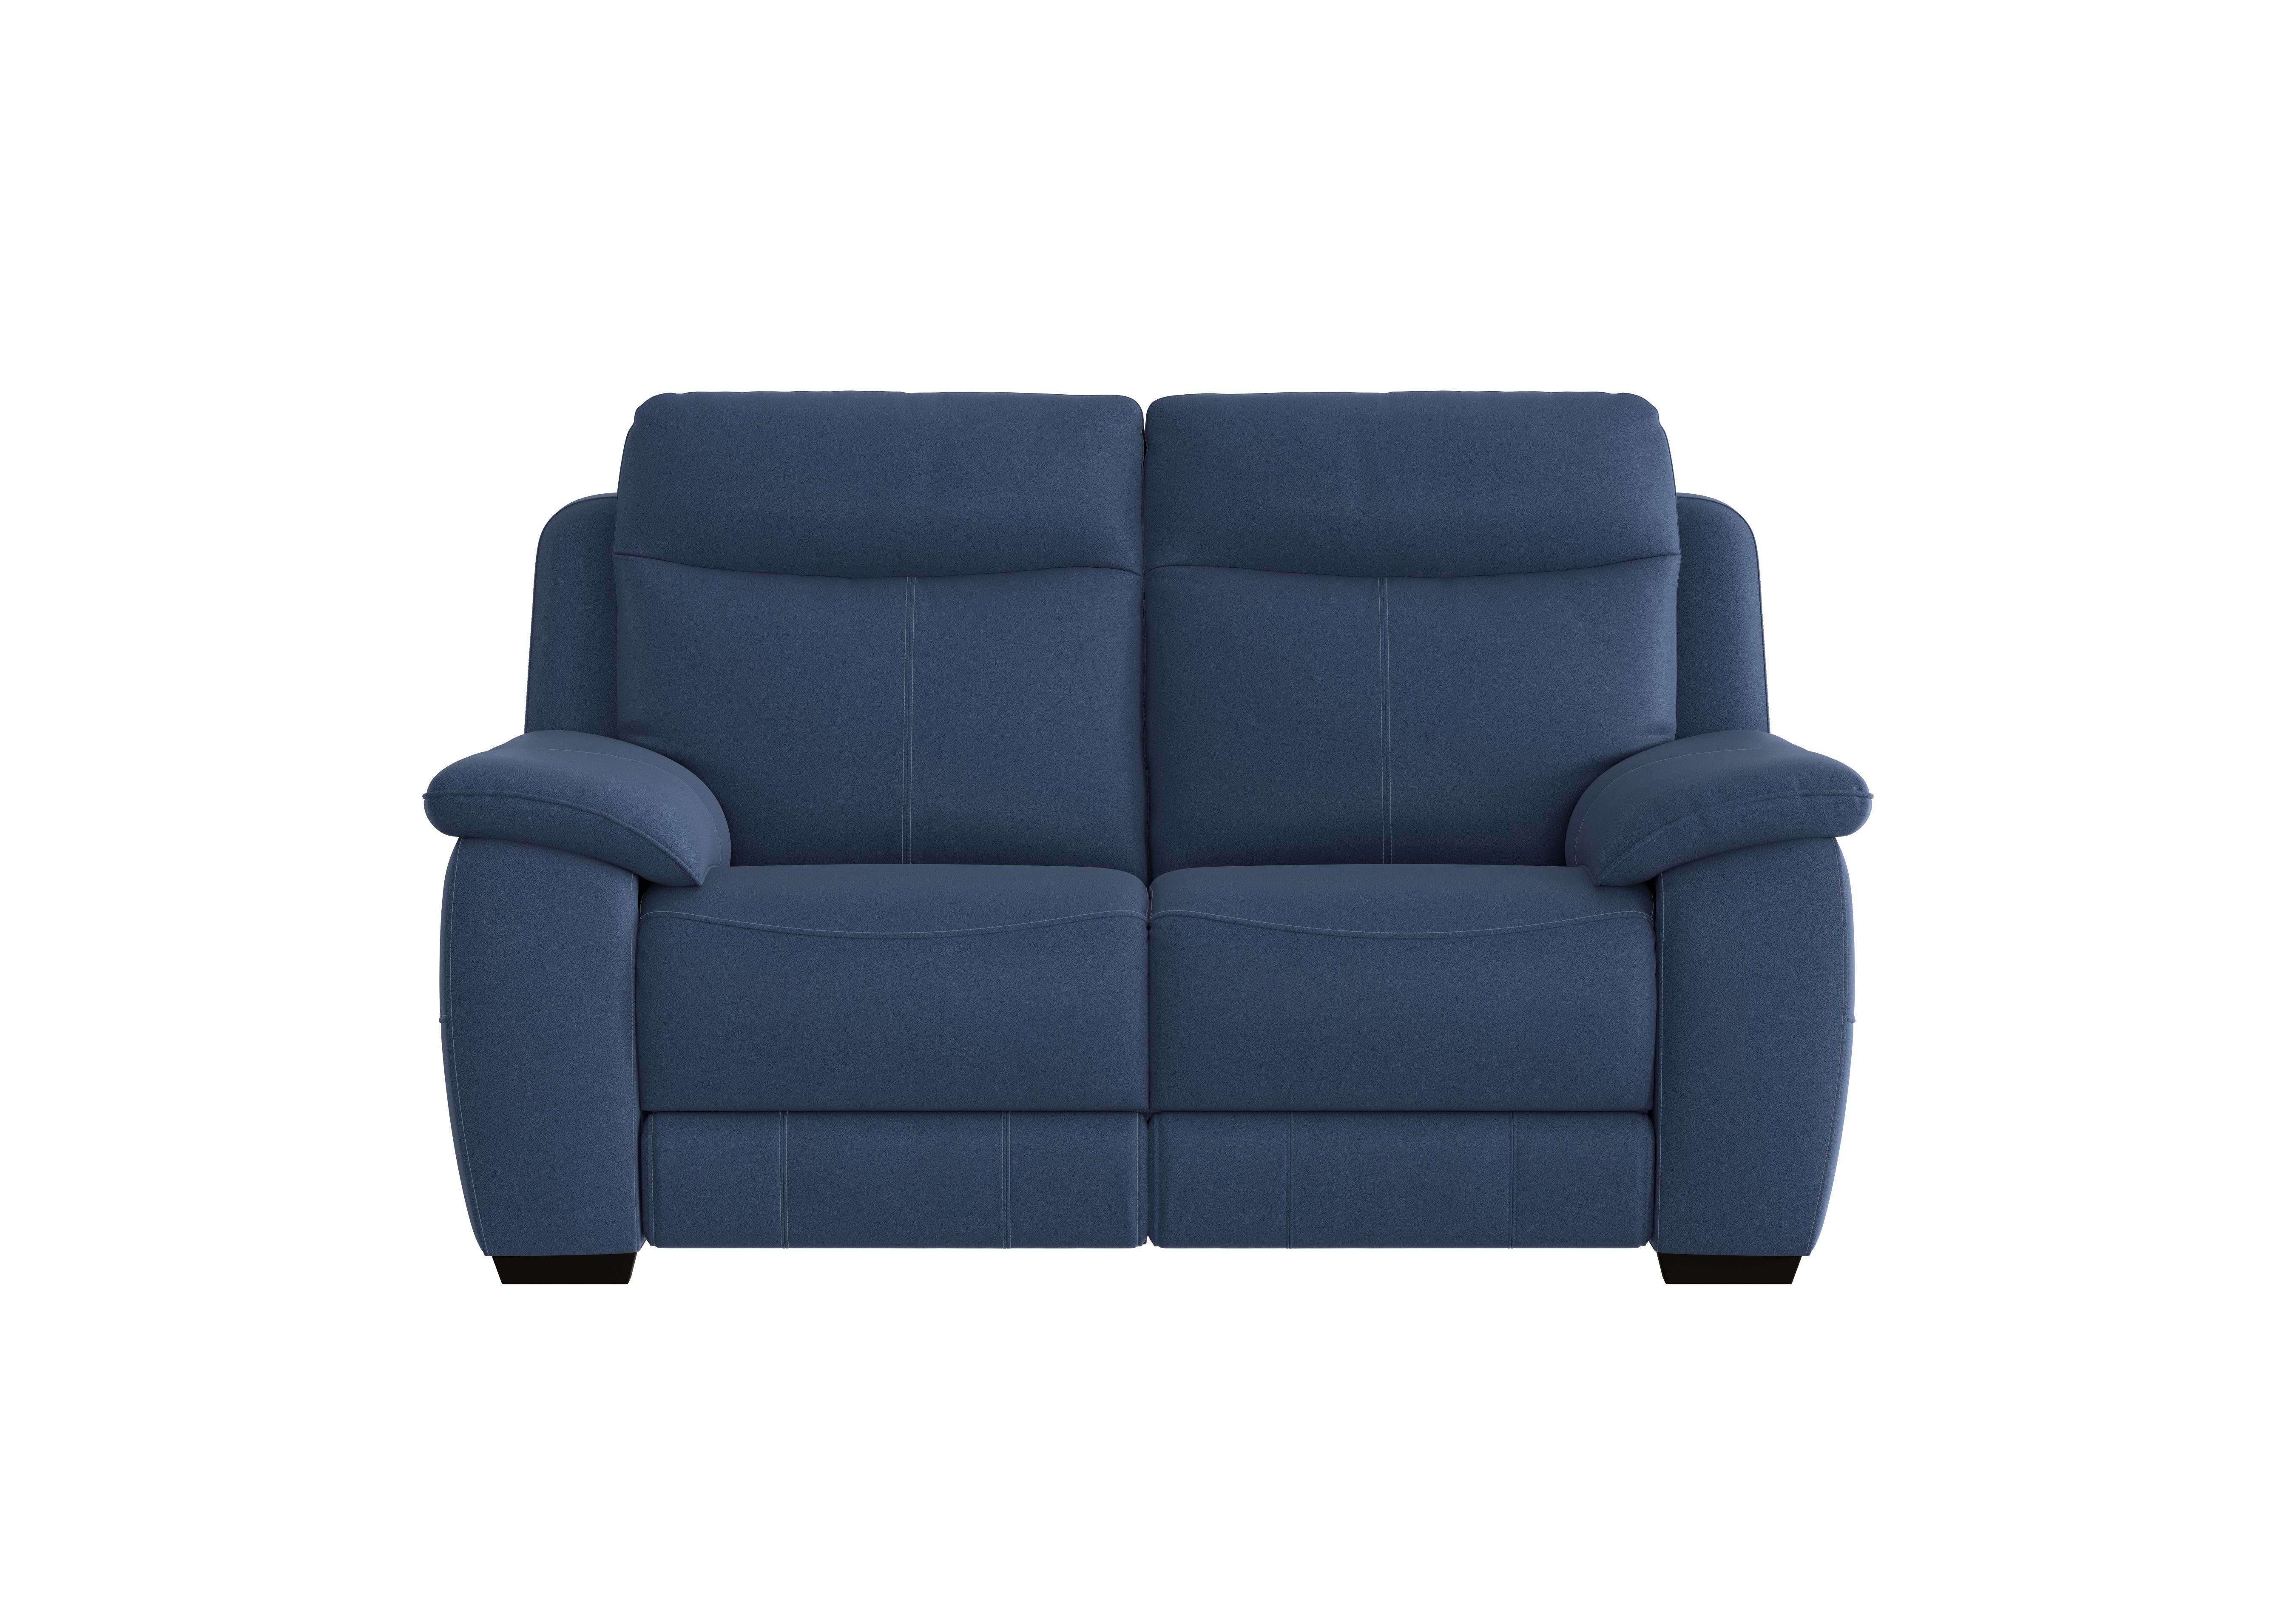 Starlight Express 2 Seater Fabric Recliner Sofa with Power Headrests in Bfa-Blj-R10 Blue on Furniture Village